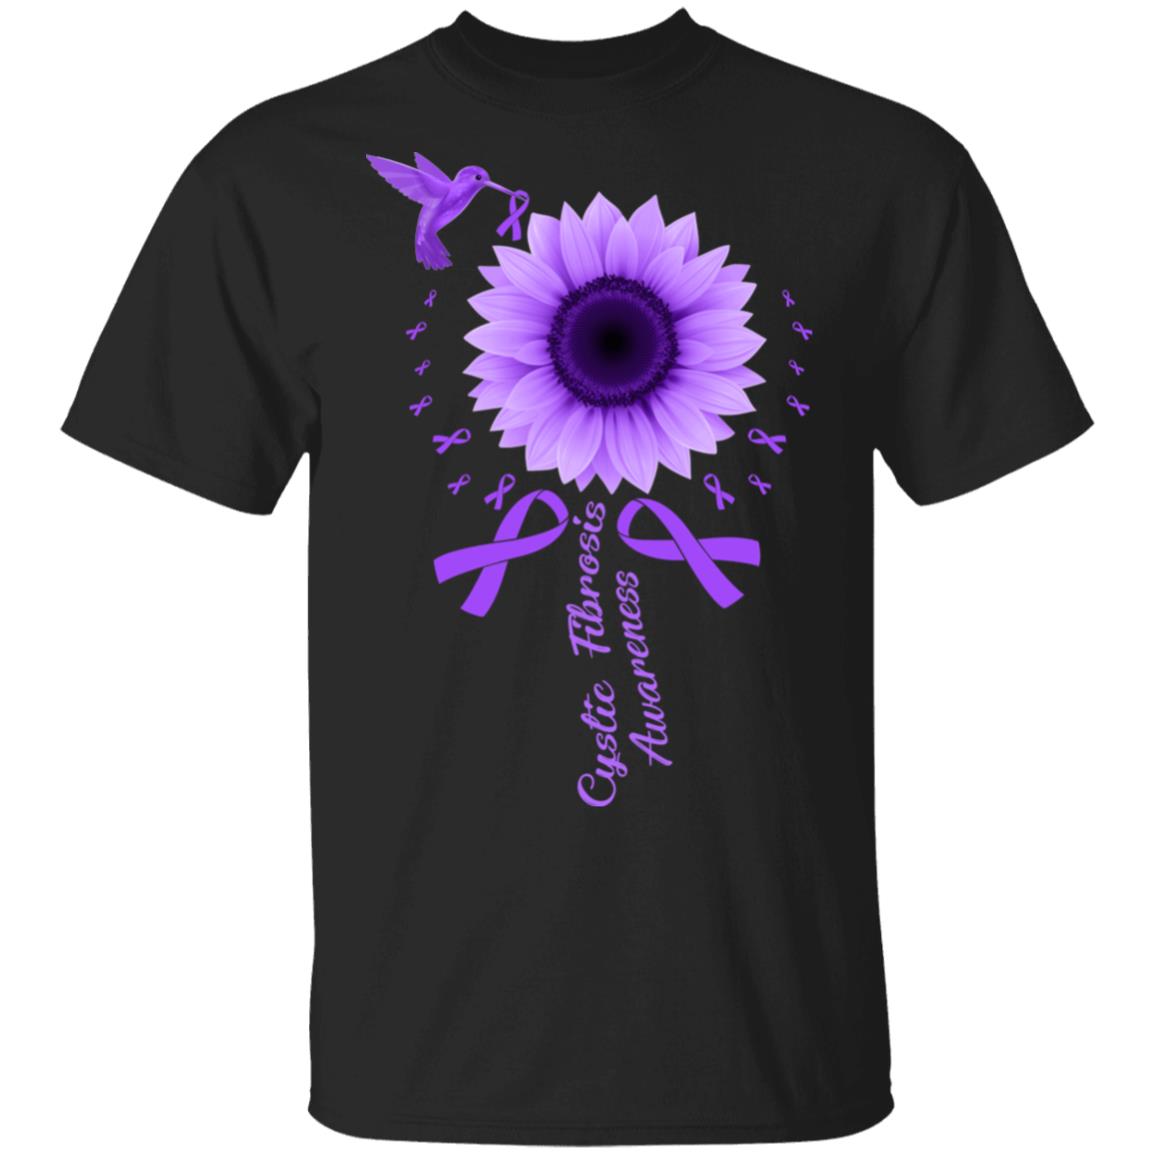 Floral Cystic Fibrosis Shirt, Cystic Fibrosis Gift, Lung Graphic Tees,  Invisible Illness Tees, Gift for Her, Cystic Fibrosis Survivor Outfit - Etsy